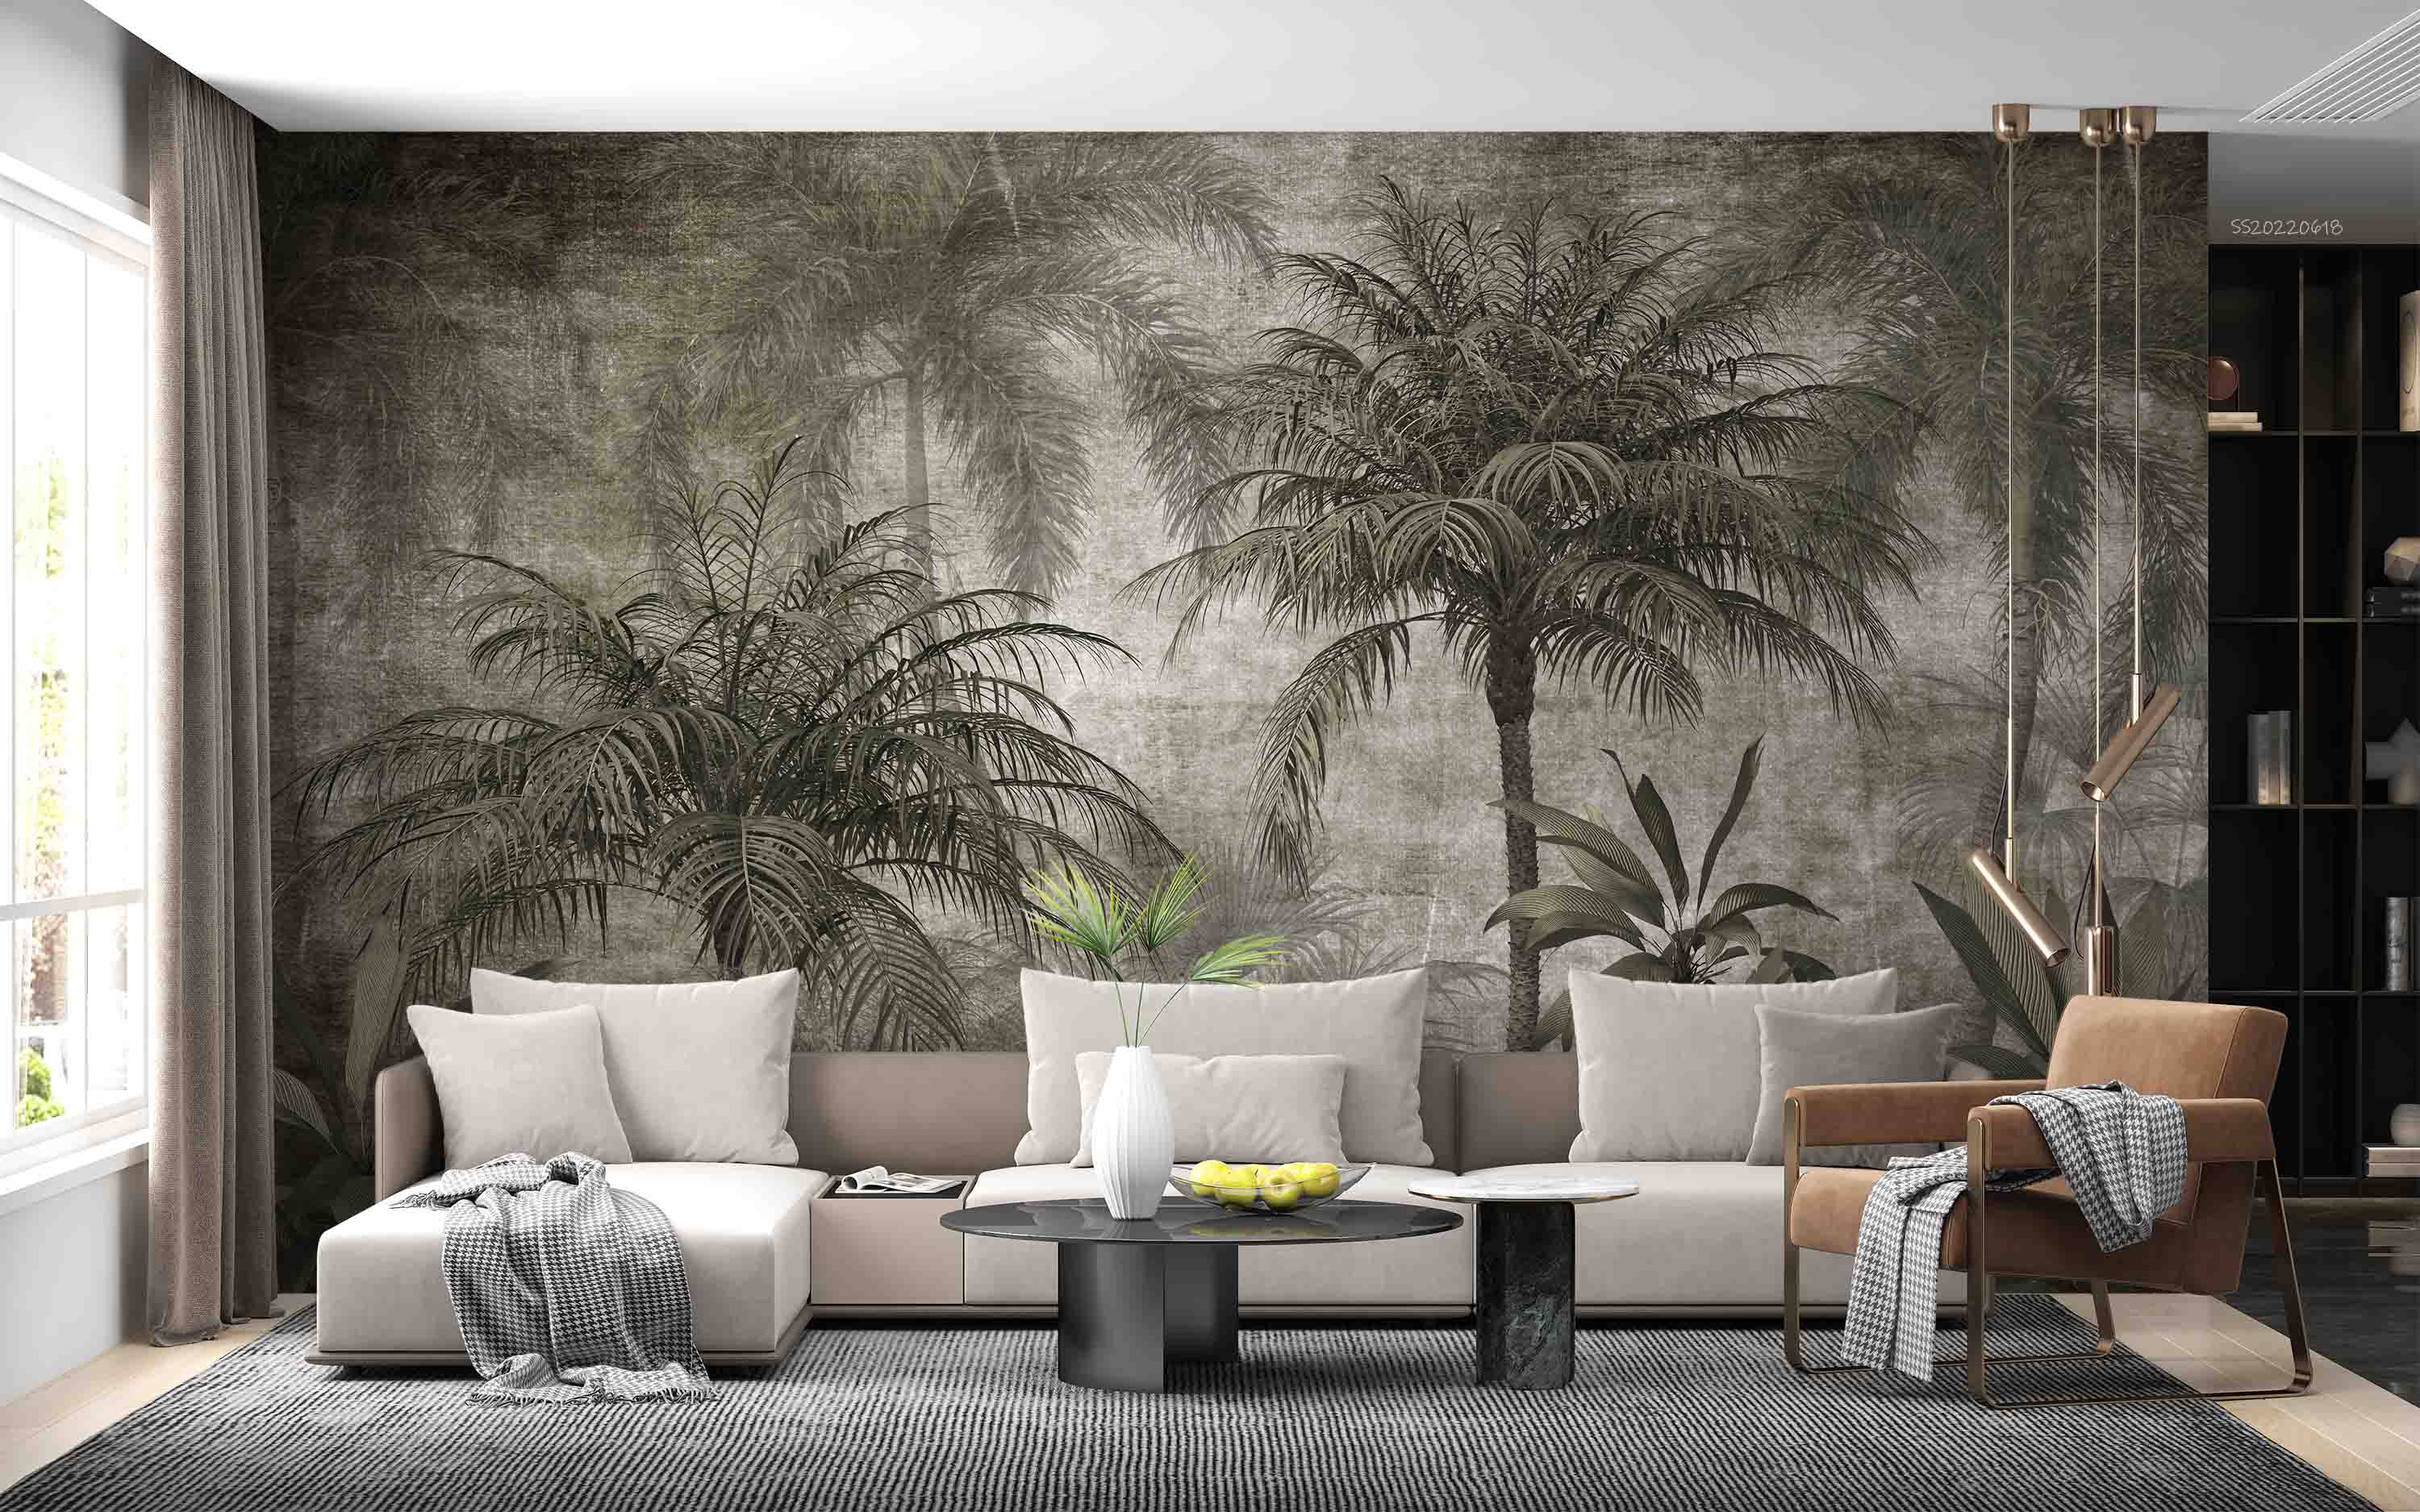 3D Vintage Tropical Palm Tree Leaves Scenery Wall Mural Wallpaper GD 773- Jess Art Decoration